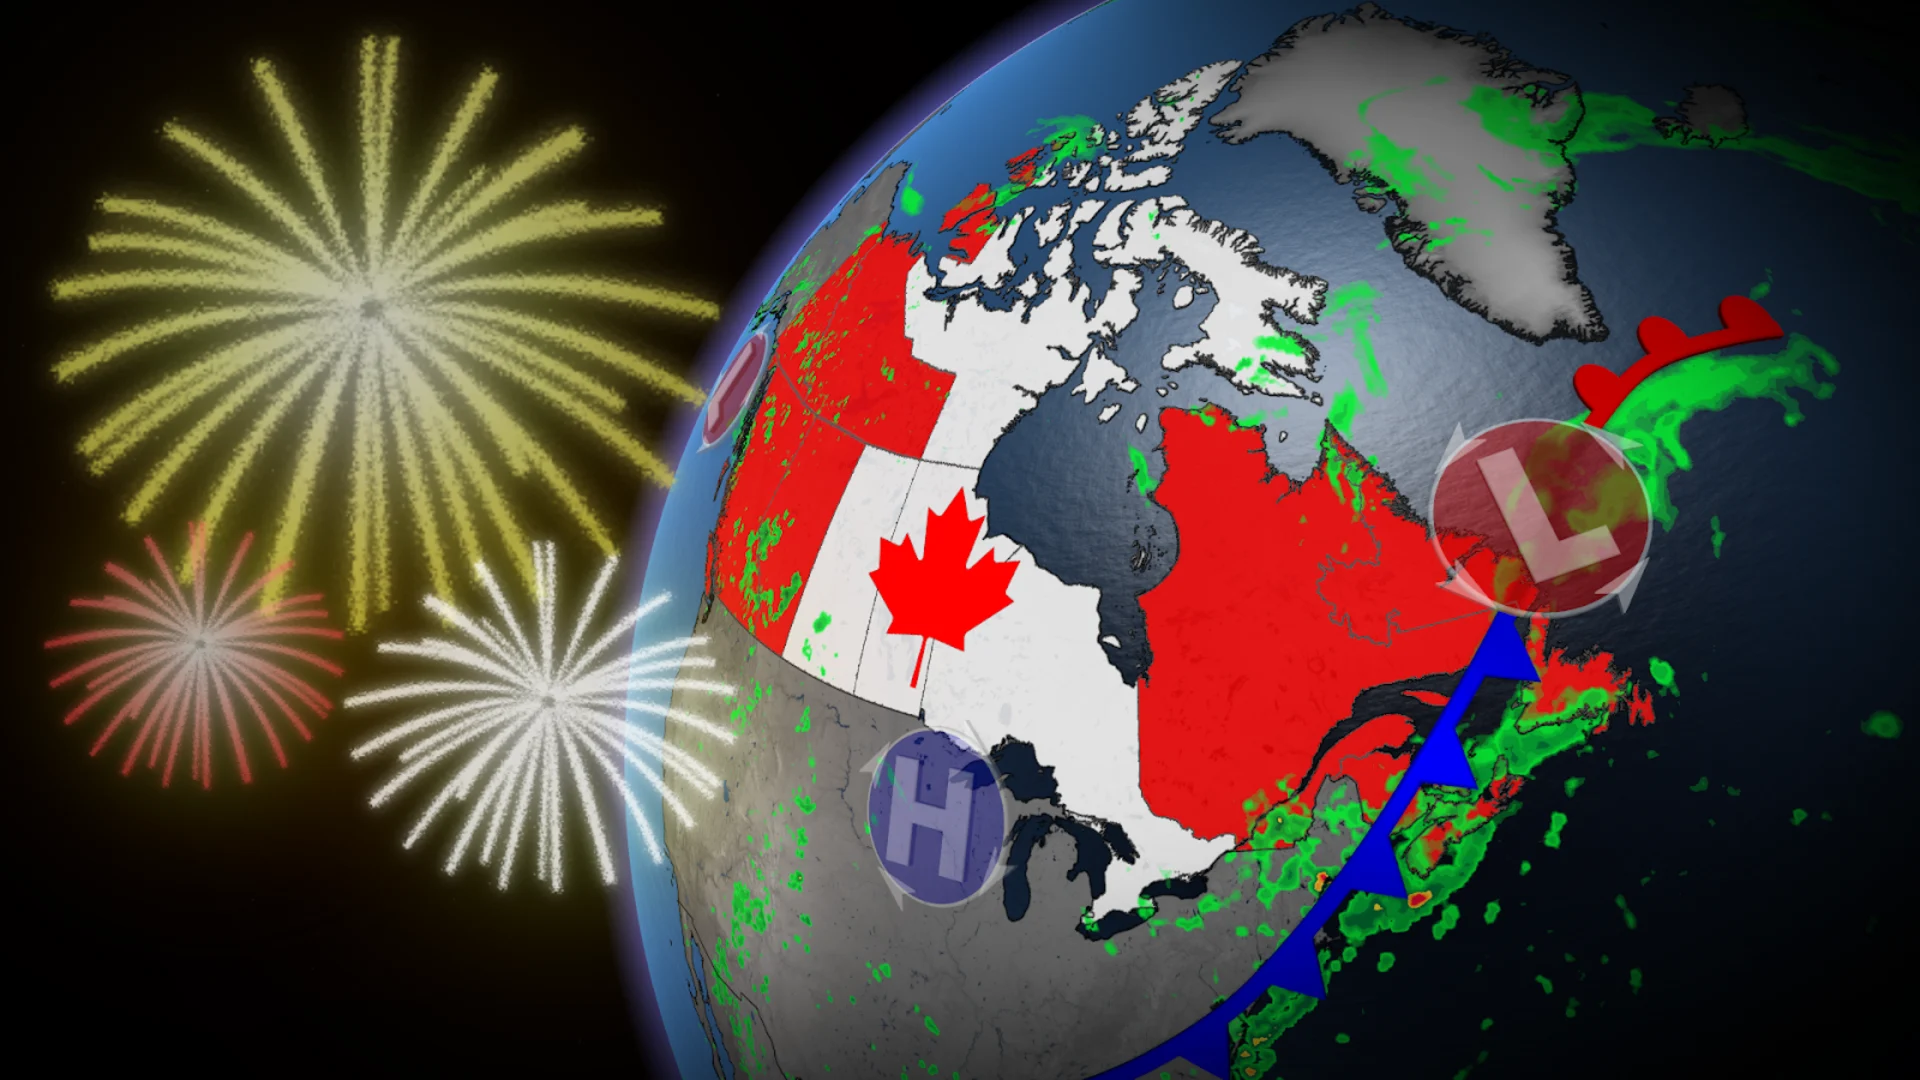 The weekend may have an unsettled start, but don't let it wash out your plans. See what weather is in store for Quebec this Canada Day, here